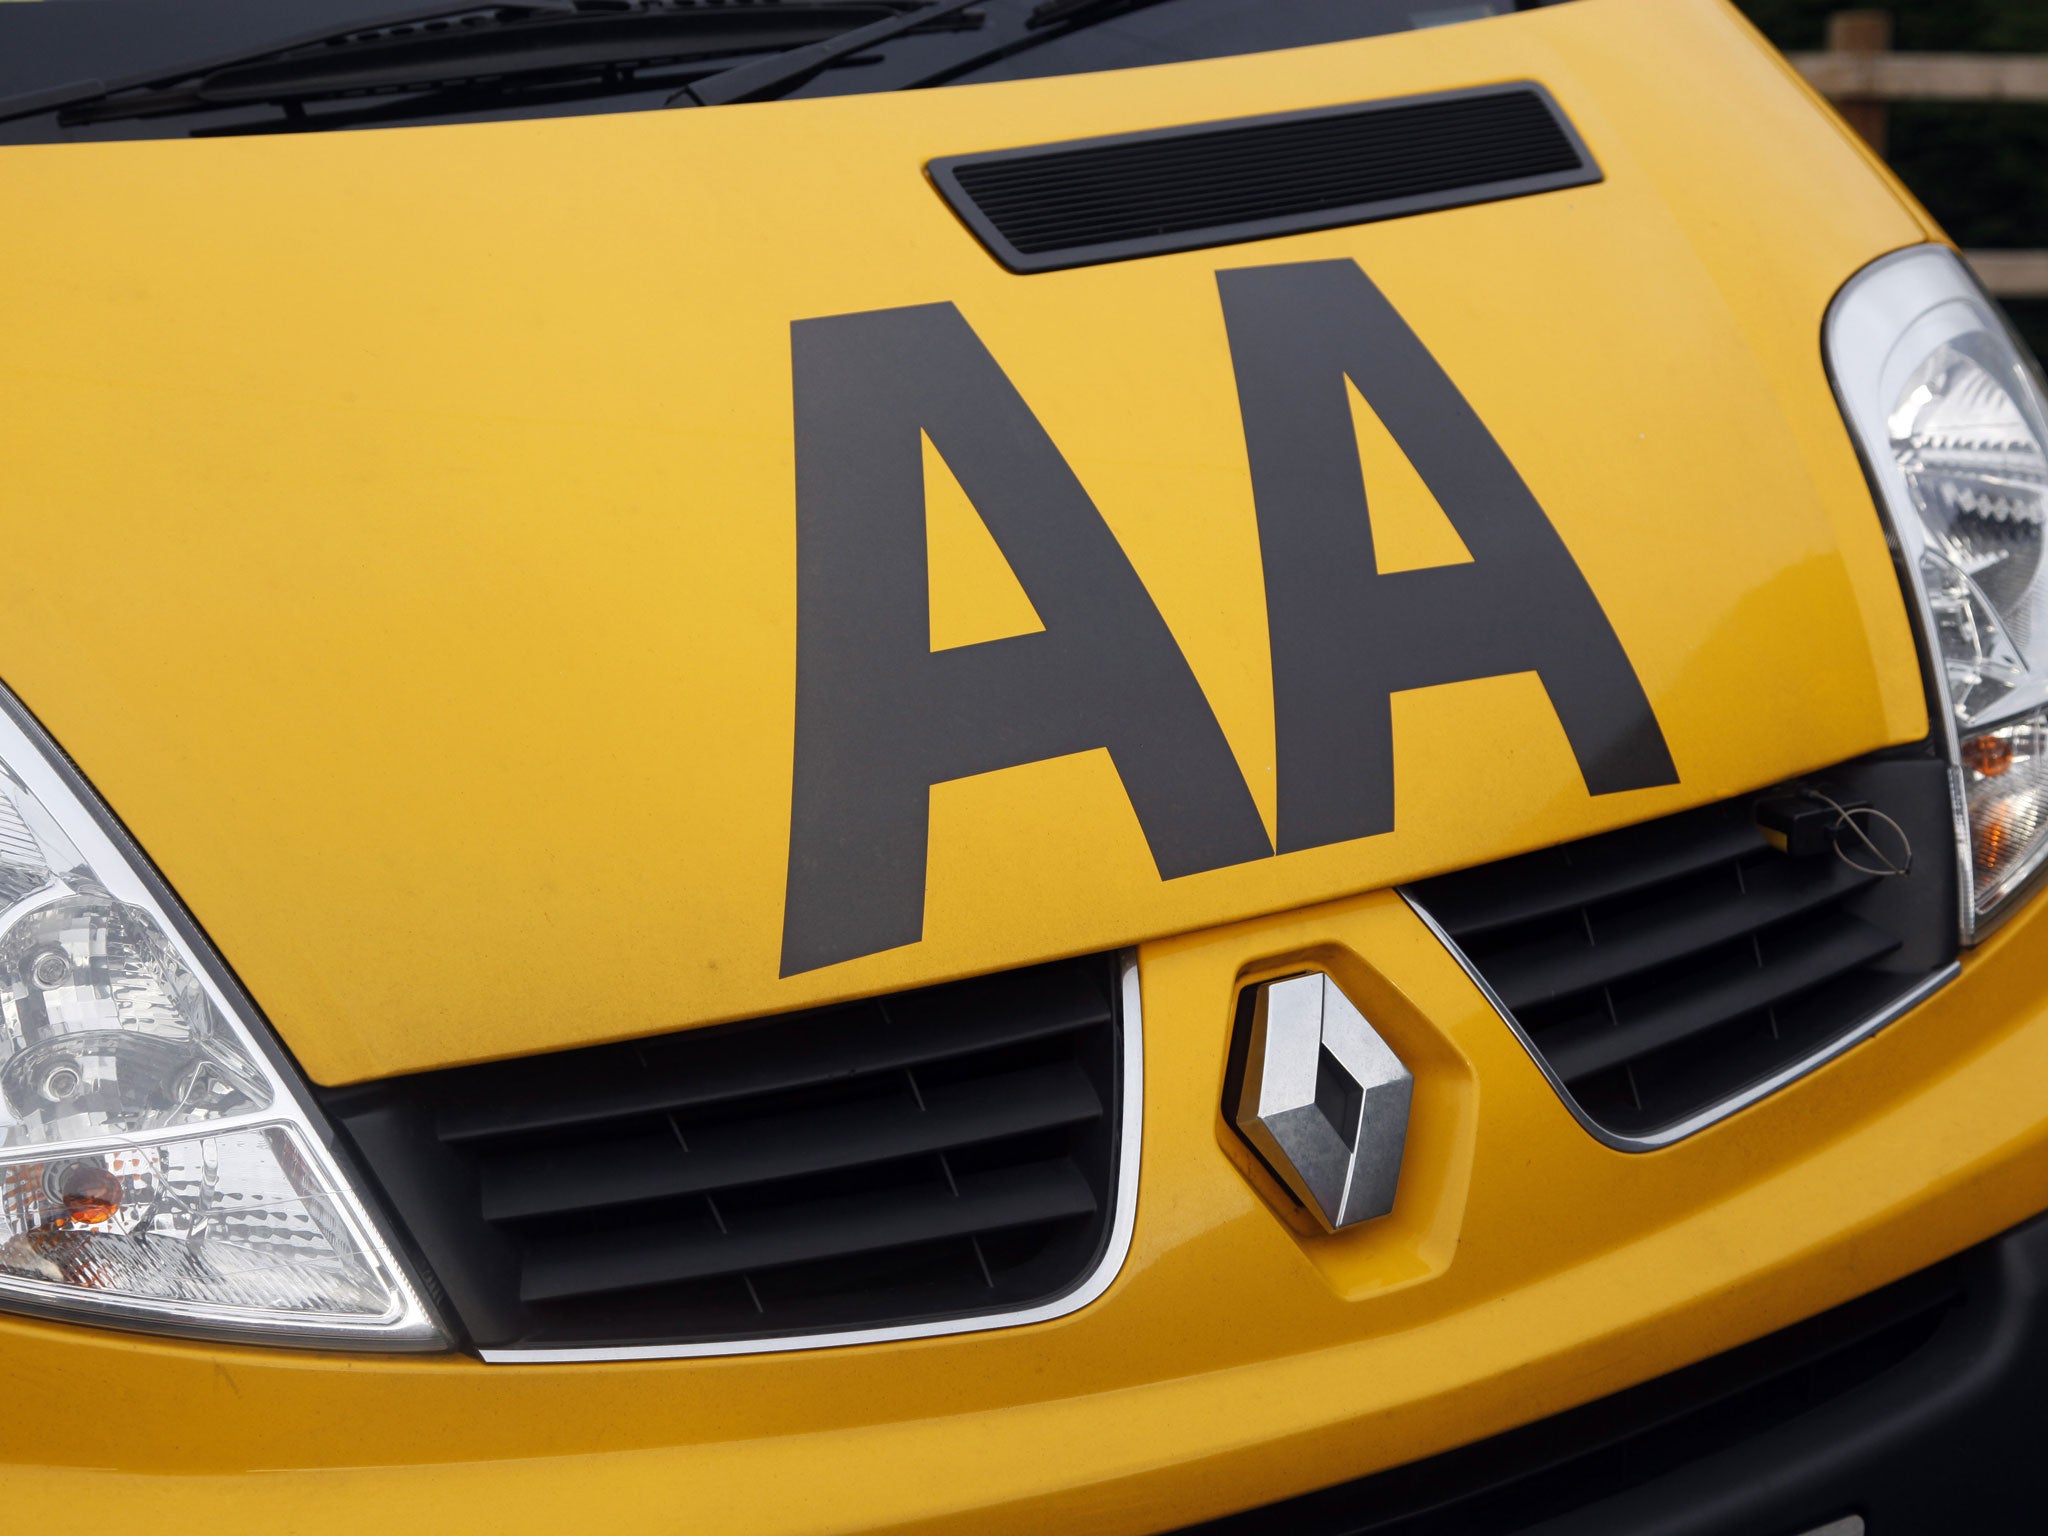 The AA was owned by its members until 1999 when it was acquired by Centrica for £1.1bn